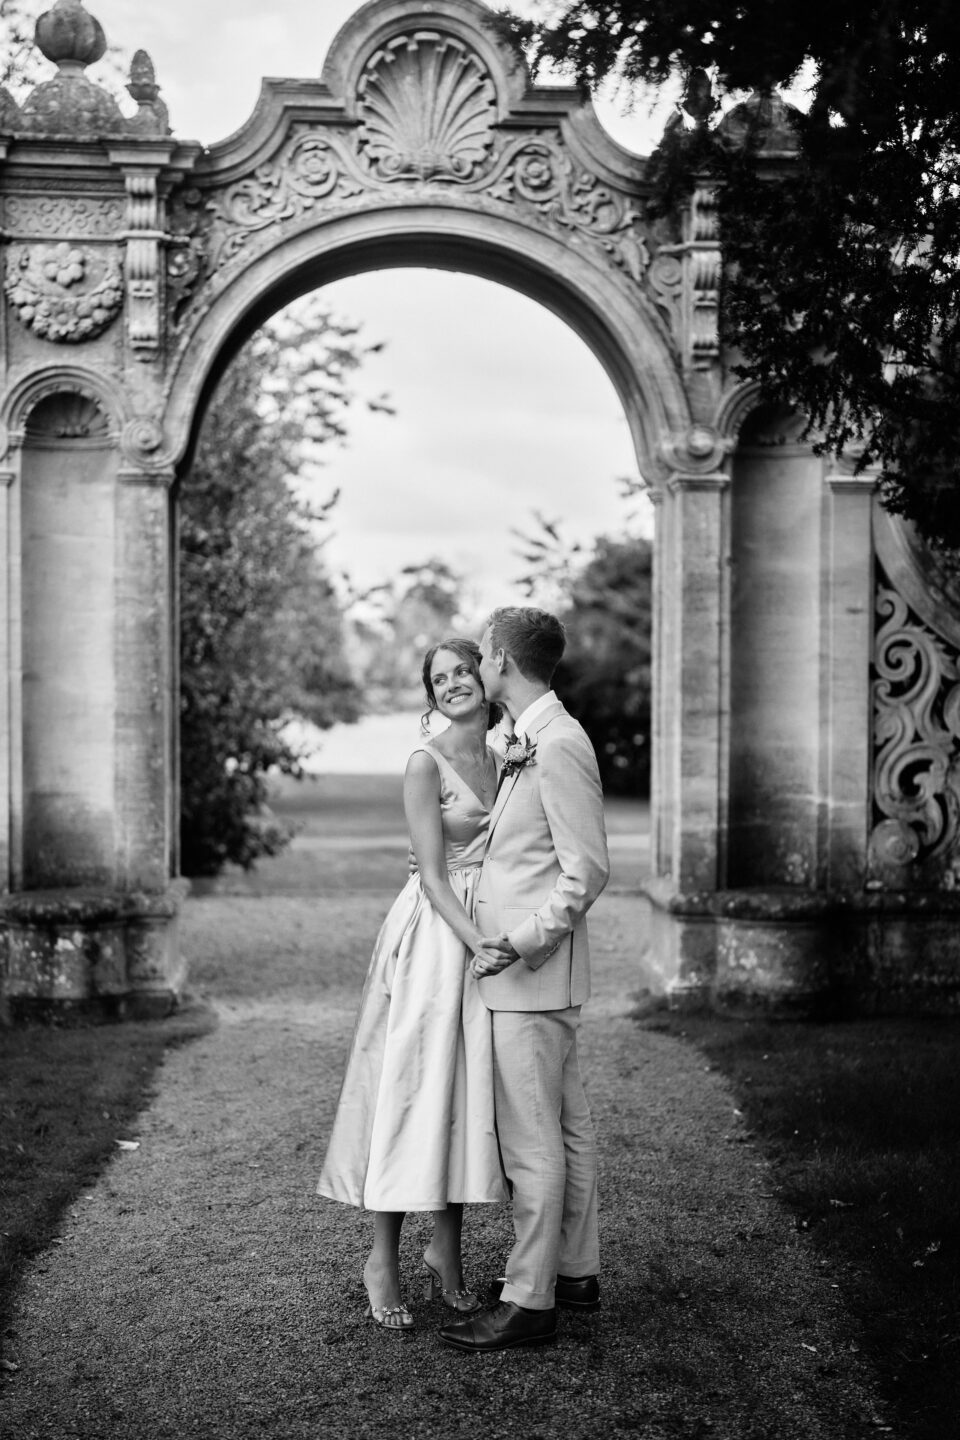 A monochrome picture of a newlywed couple standing before an arch.